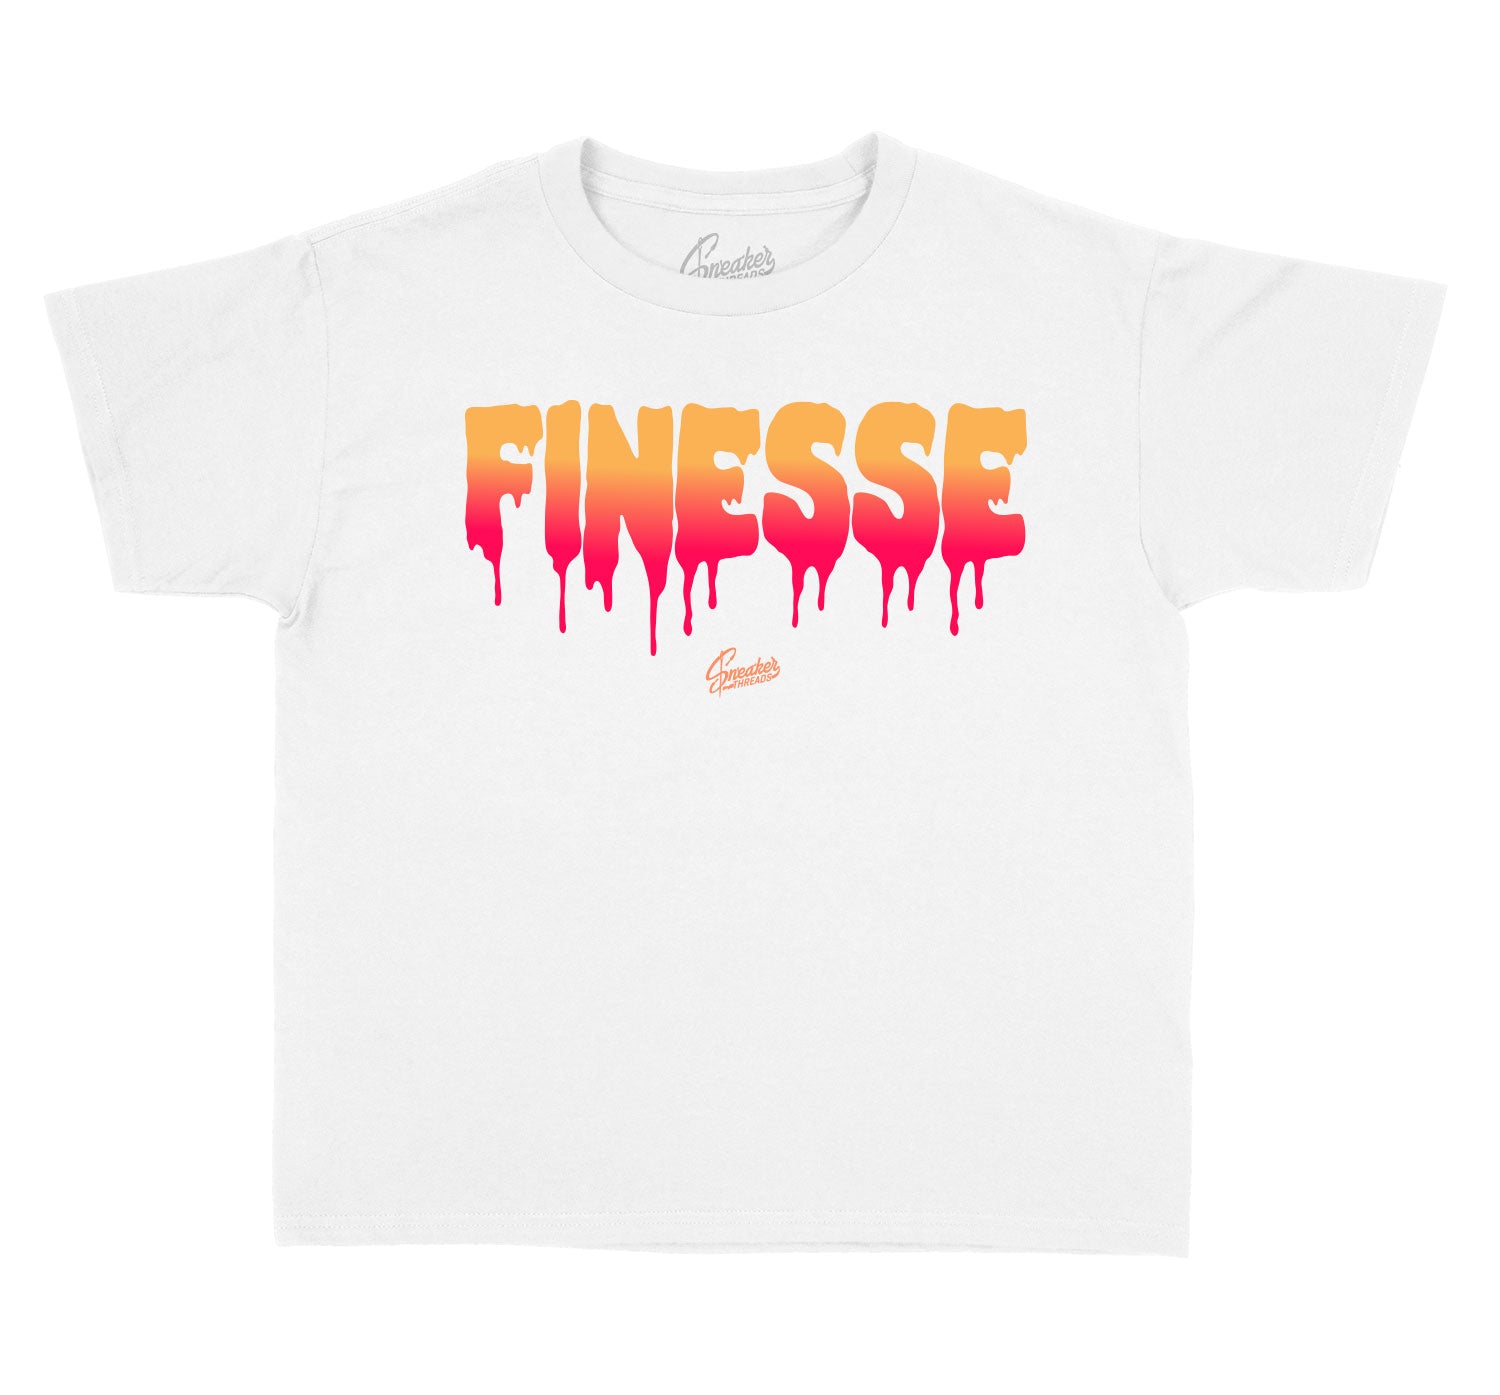 Finesse dopest shirts for kids to match 